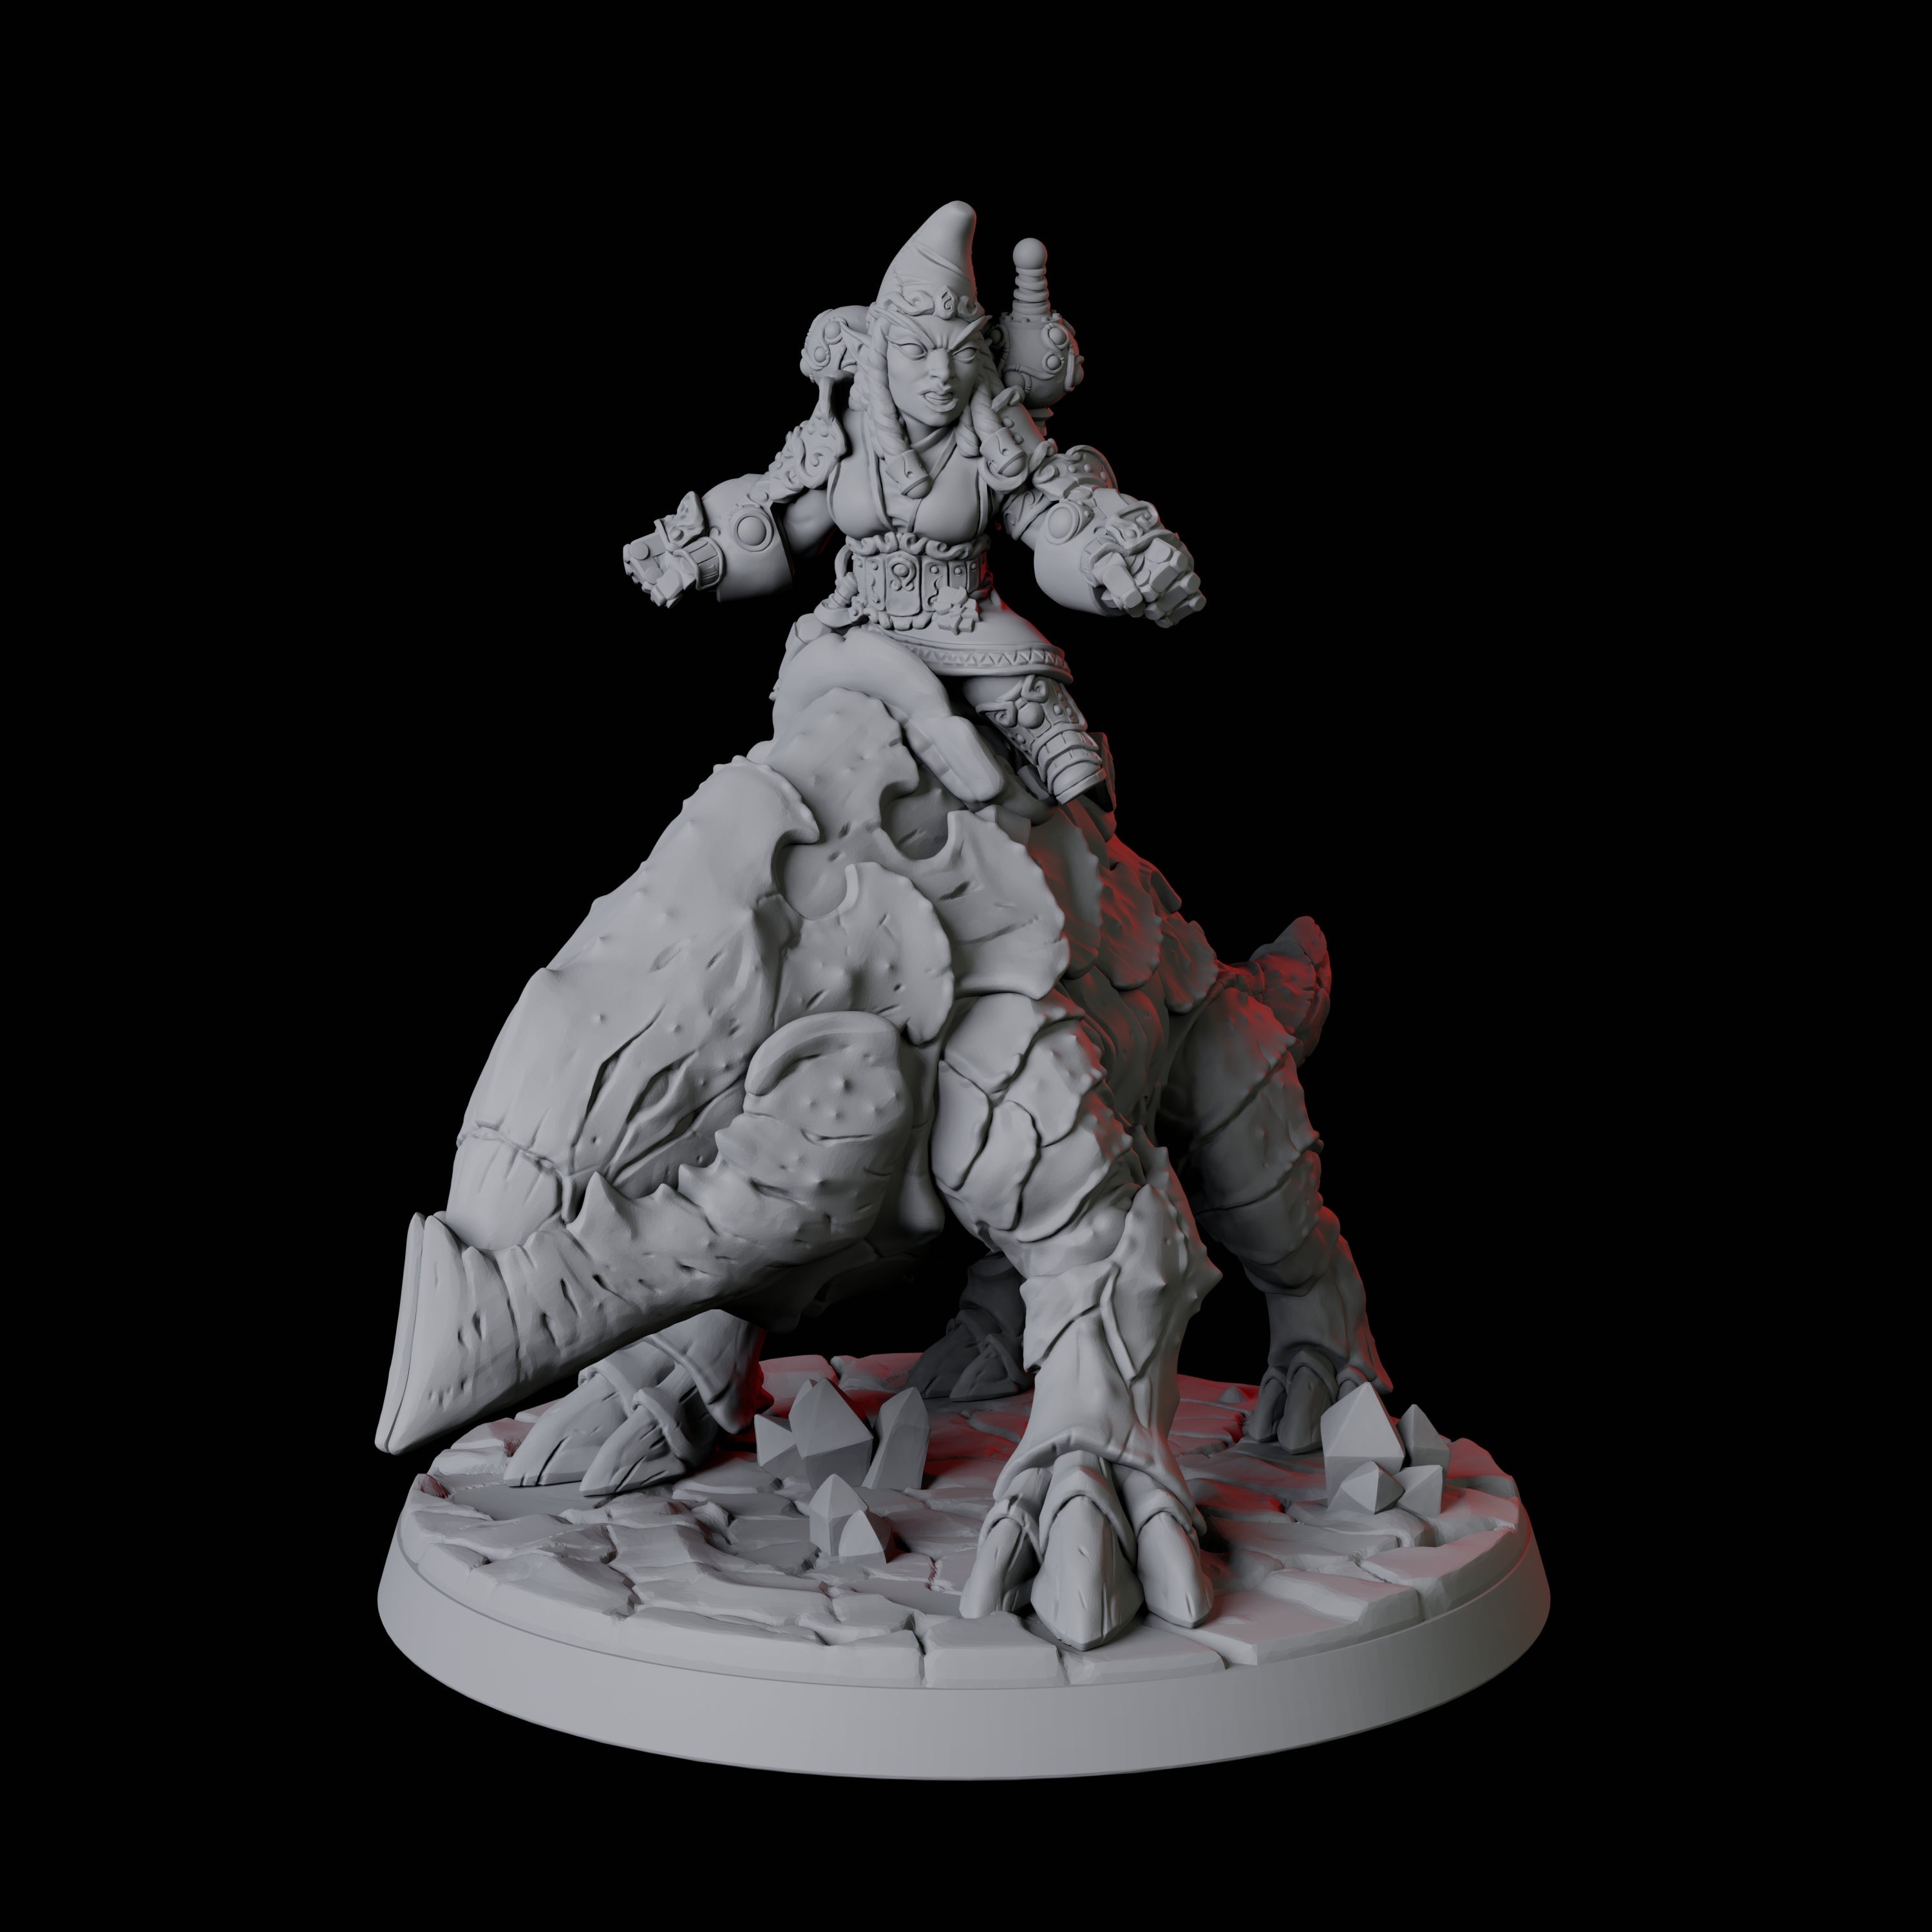 Gnome Rider D Miniature for Dungeons and Dragons, Pathfinder or other TTRPGs